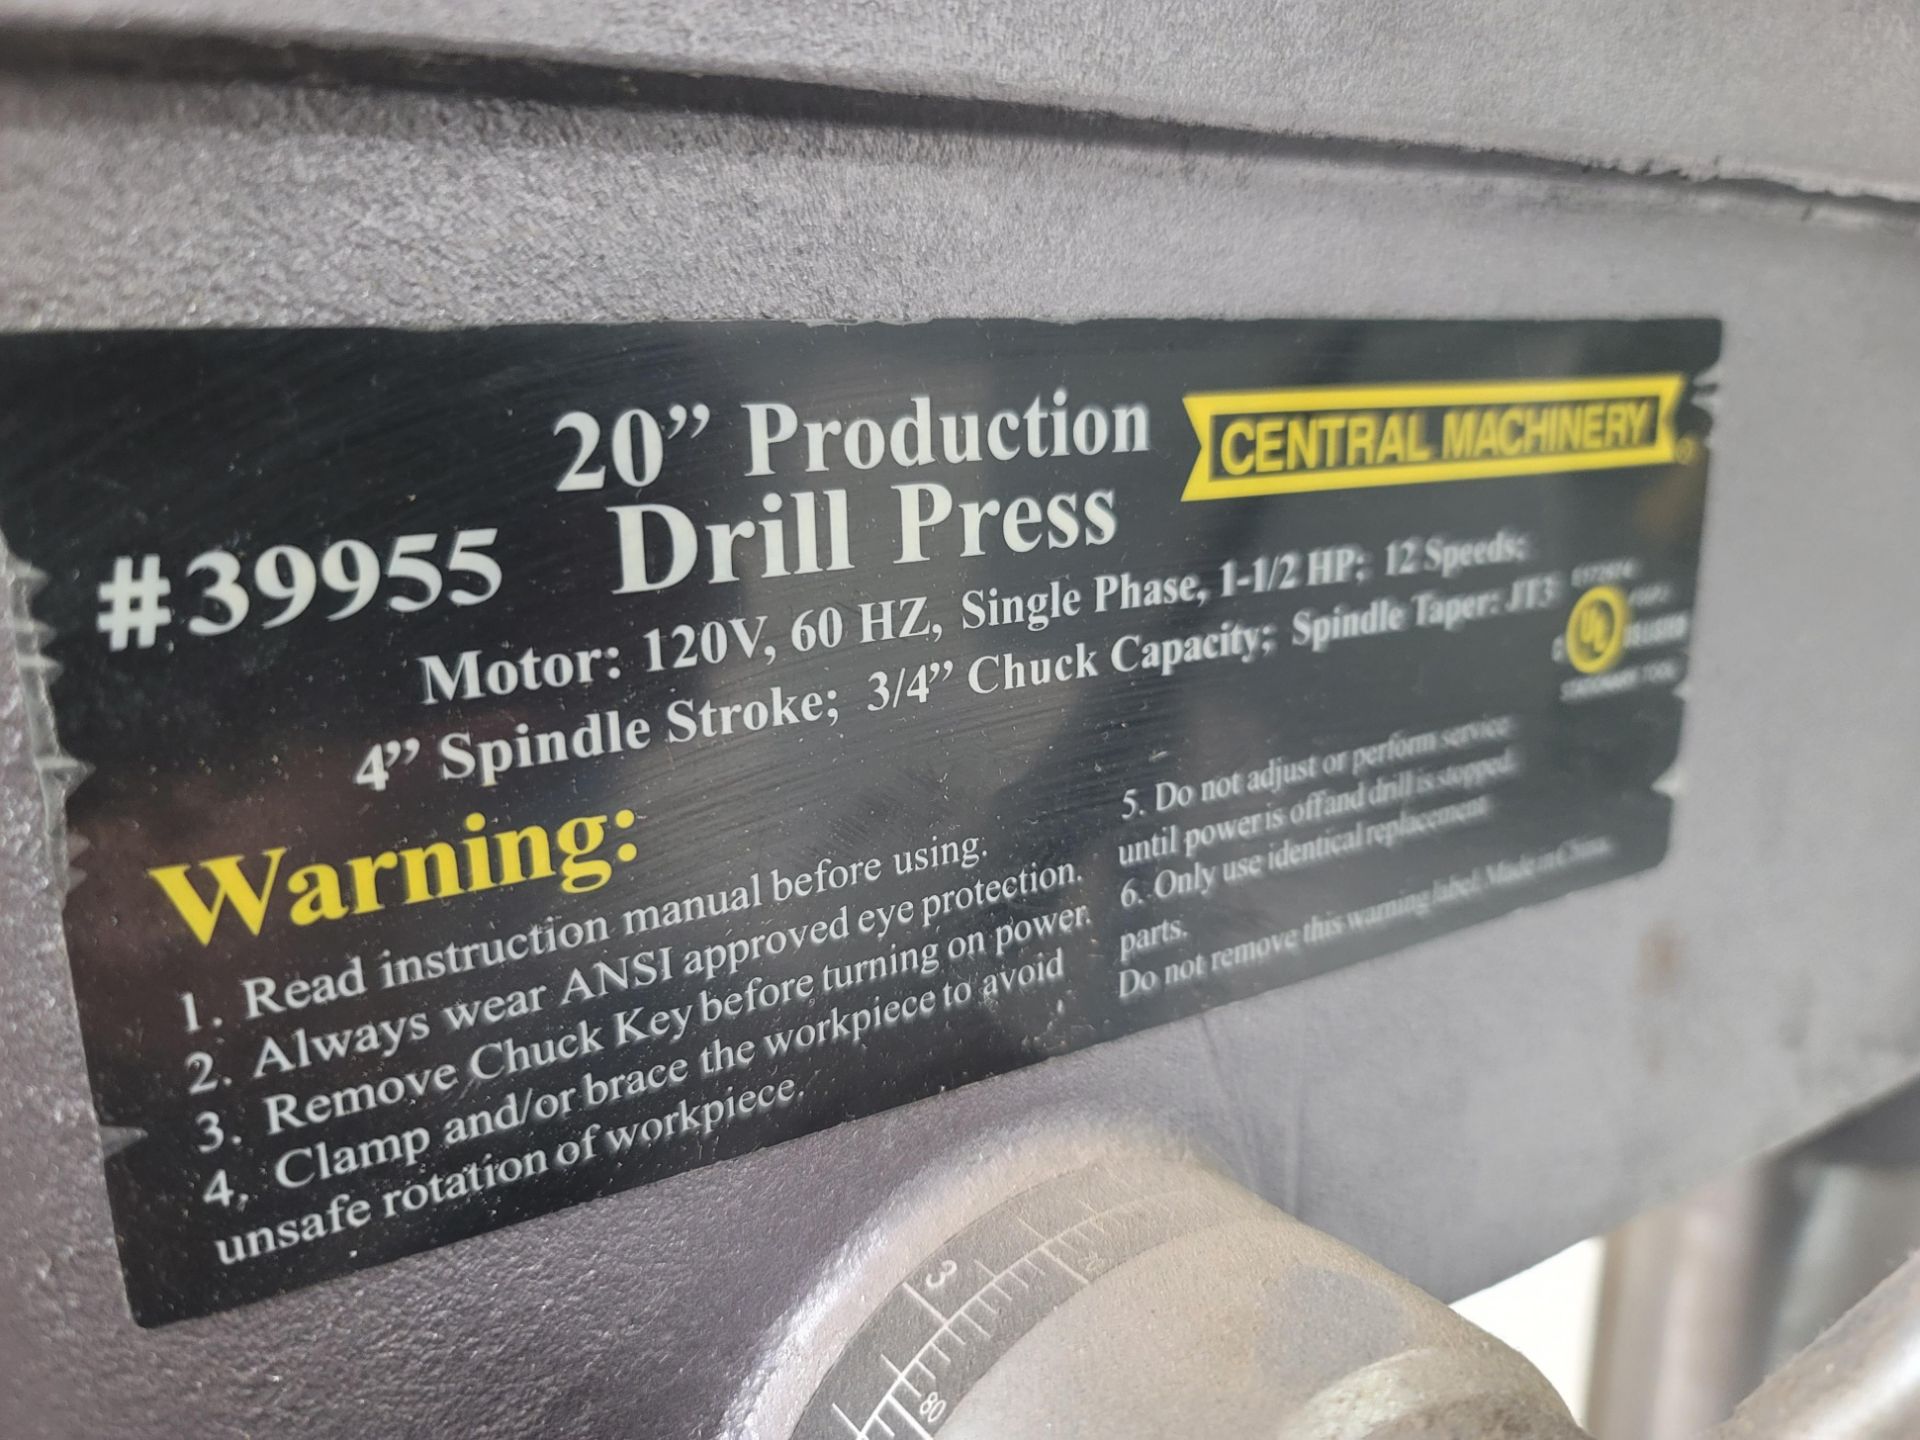 CENTRAL MACHINERY 20" PRODUCTION DRILL PRESS, MODEL 39955, 1-1/2 HP, SINGLE PHASE, JACOBS 1/2" - Image 3 of 3